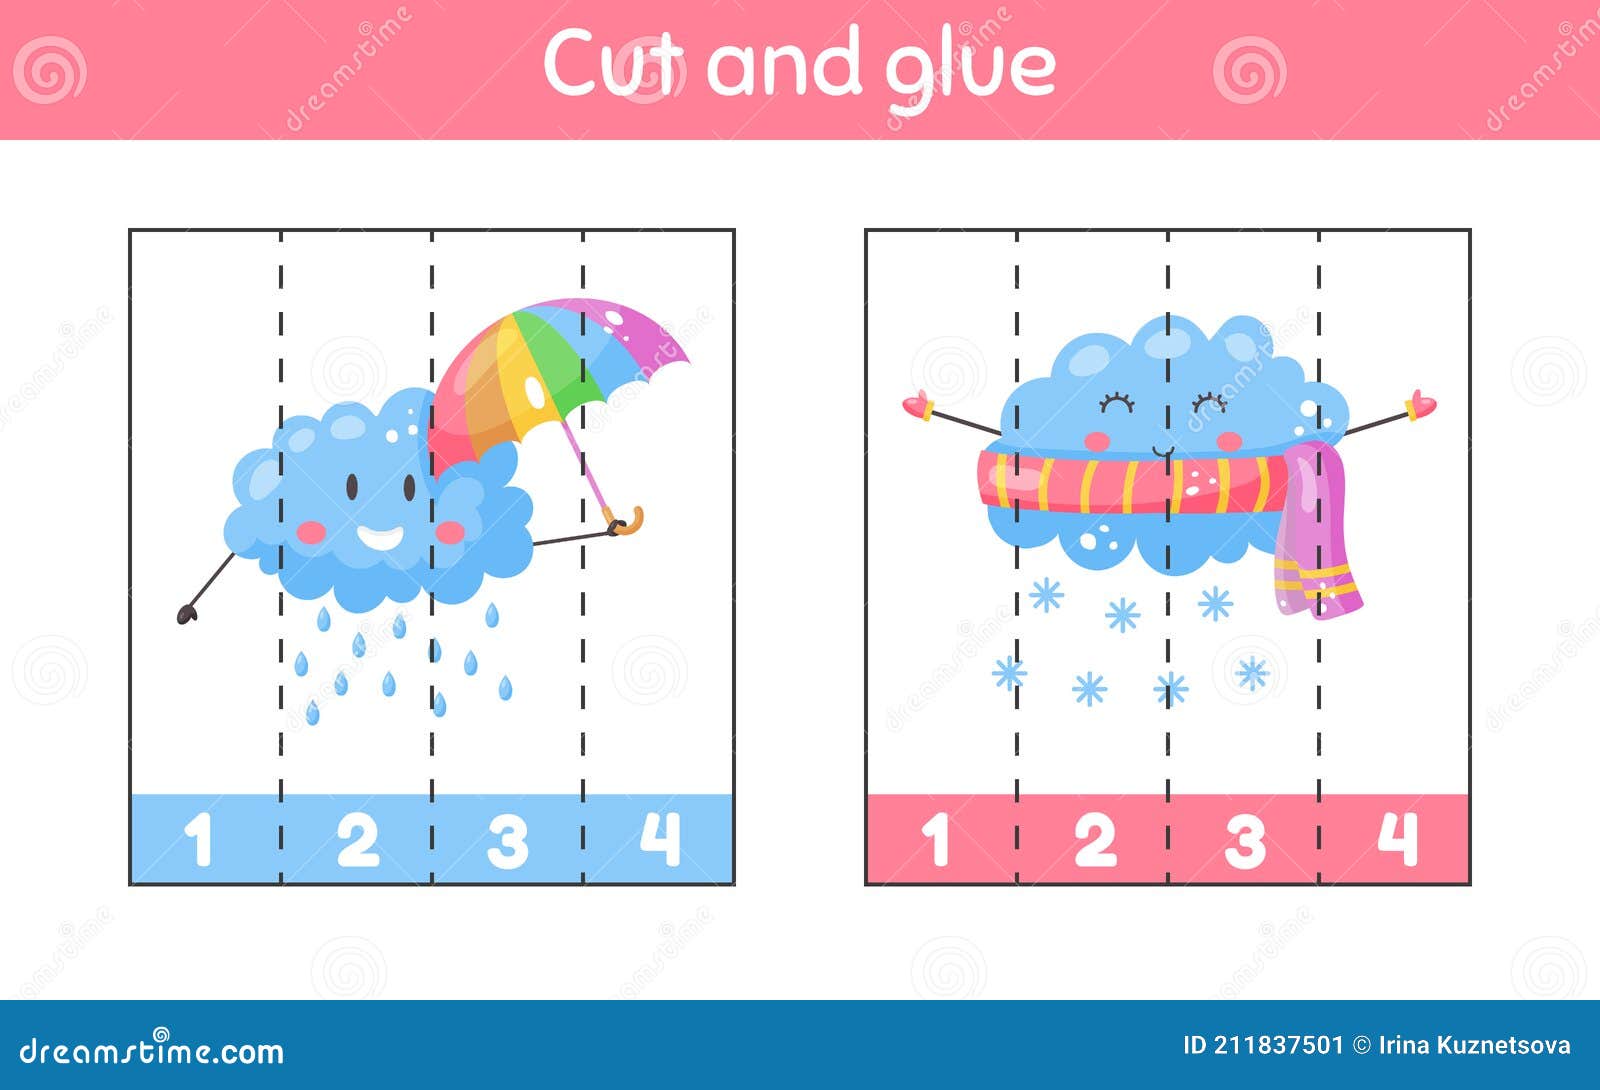 cut and glue learning numbers worksheet for kids kindergarten preschool and school age cute weather rain snow stock vector illustration of education mathematics 211837501